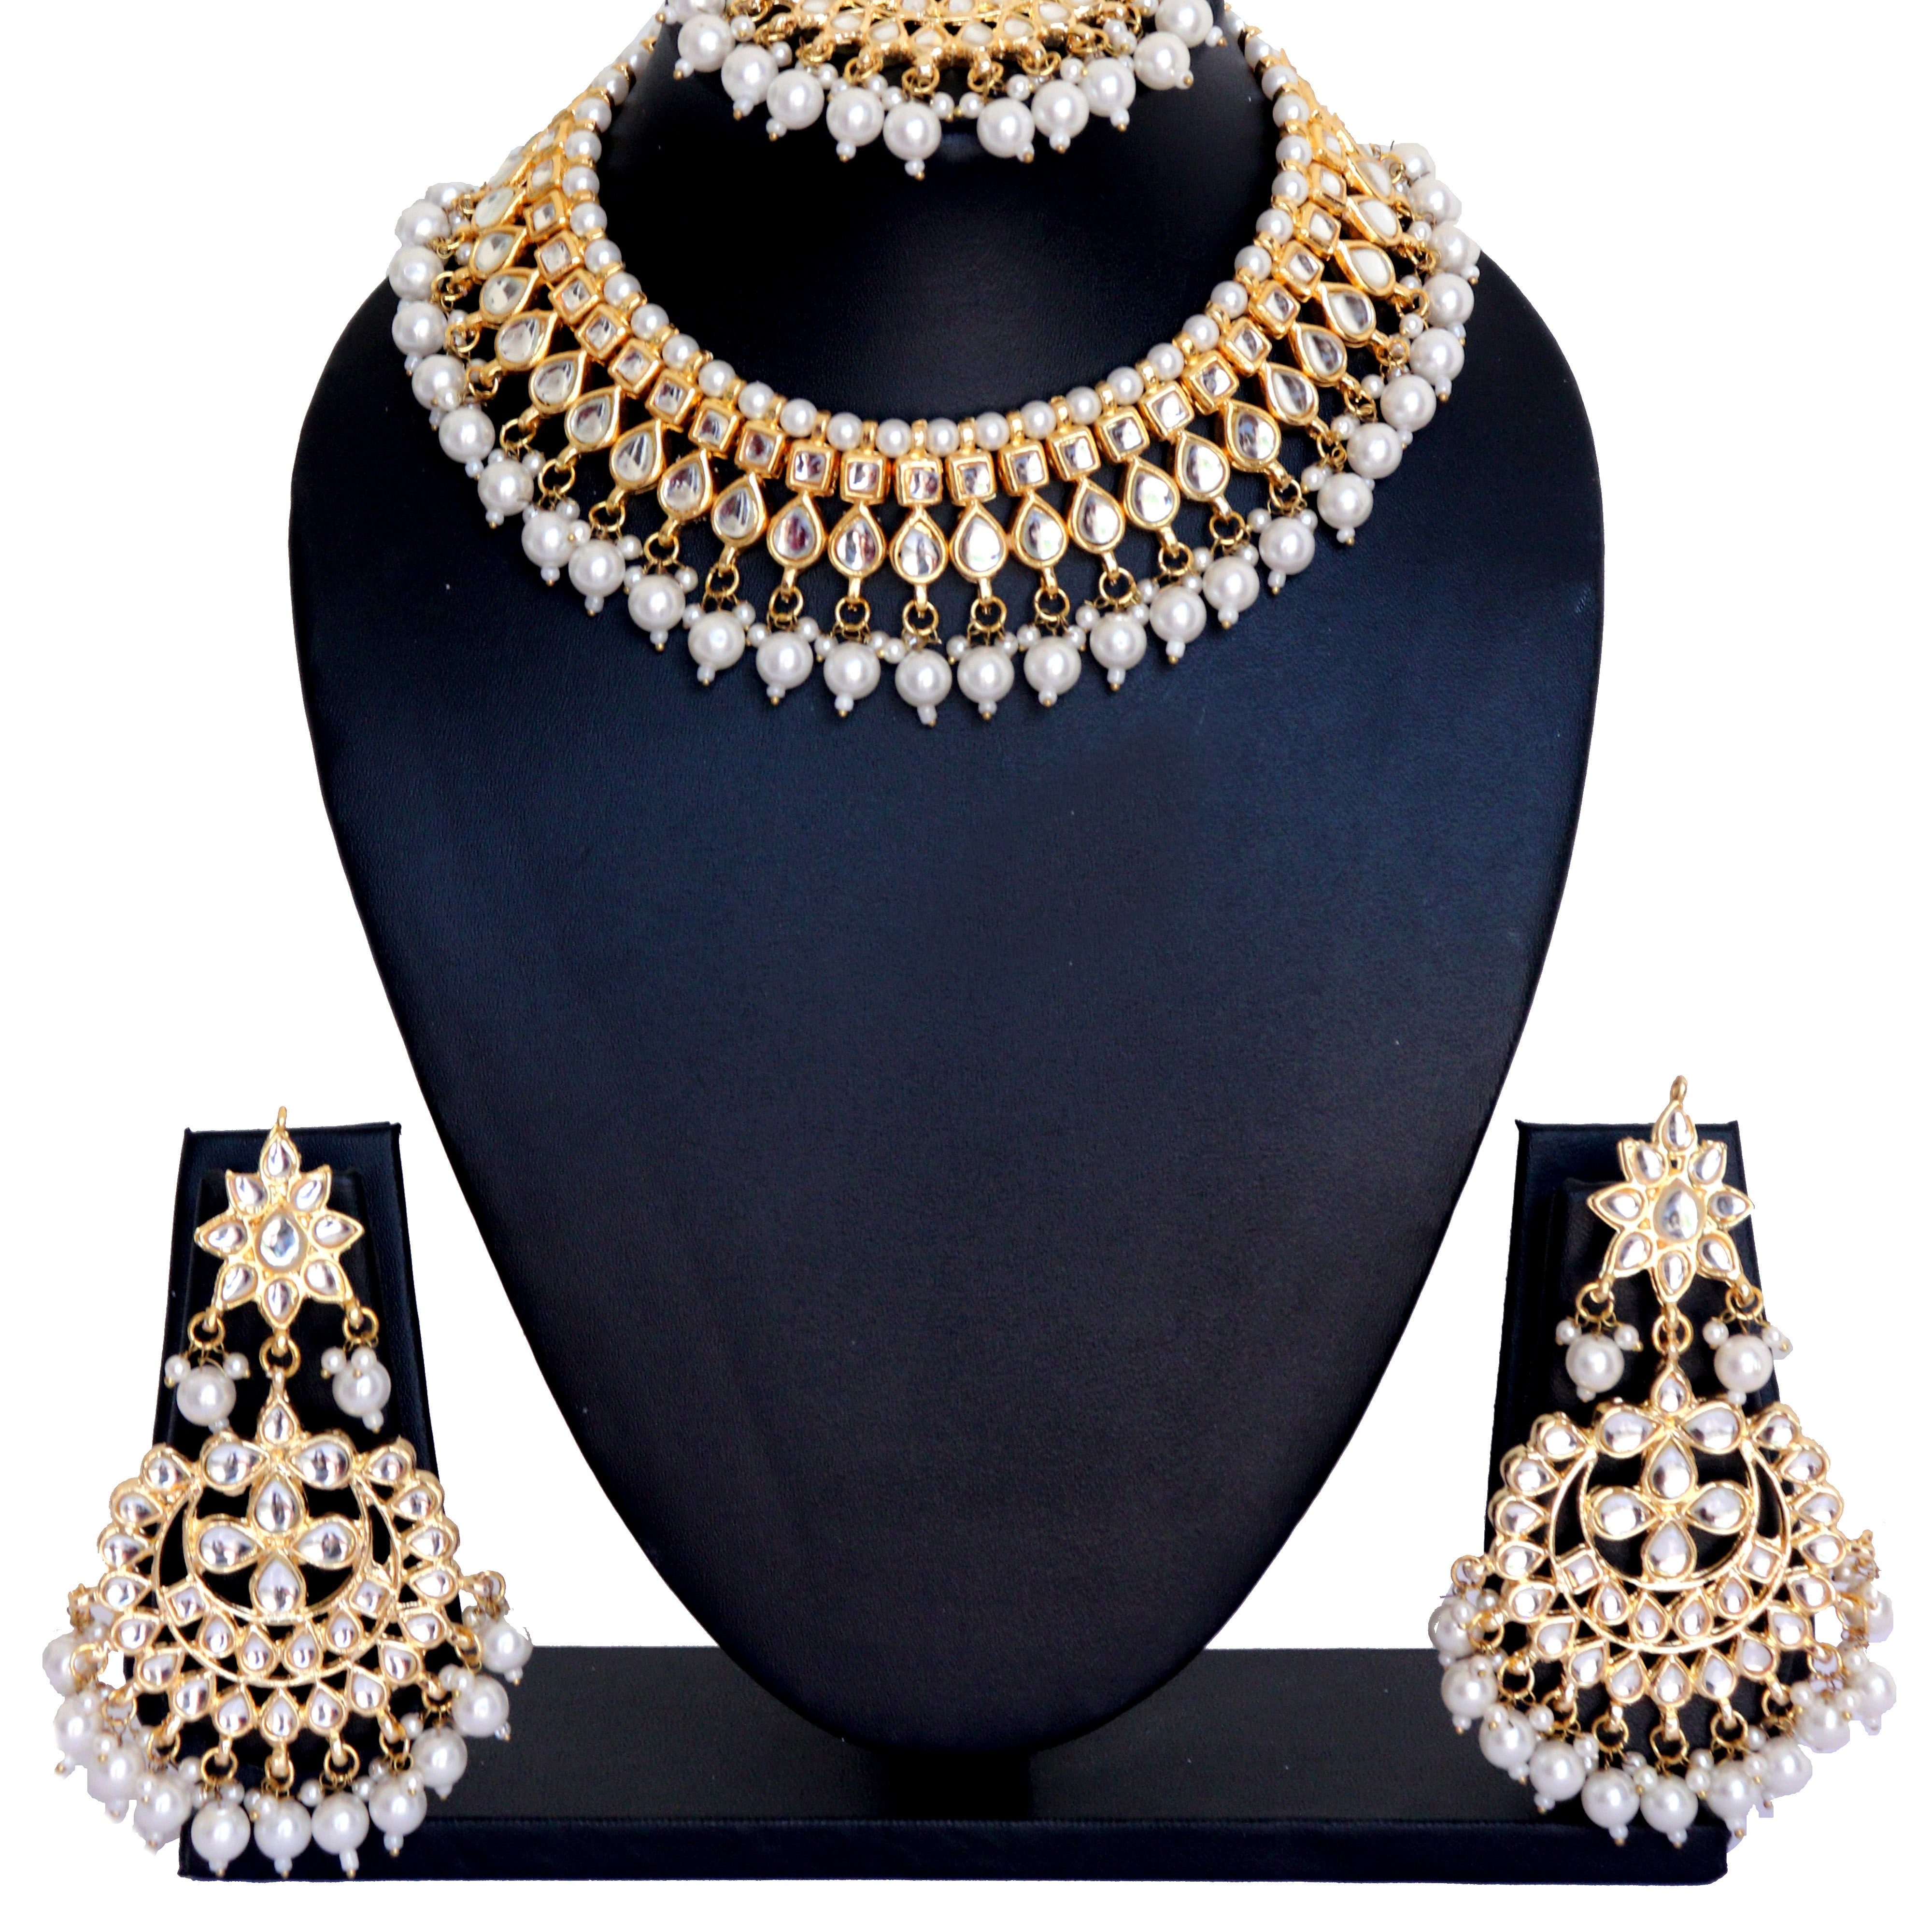 Kundan Choker Necklace Set with White Pearls